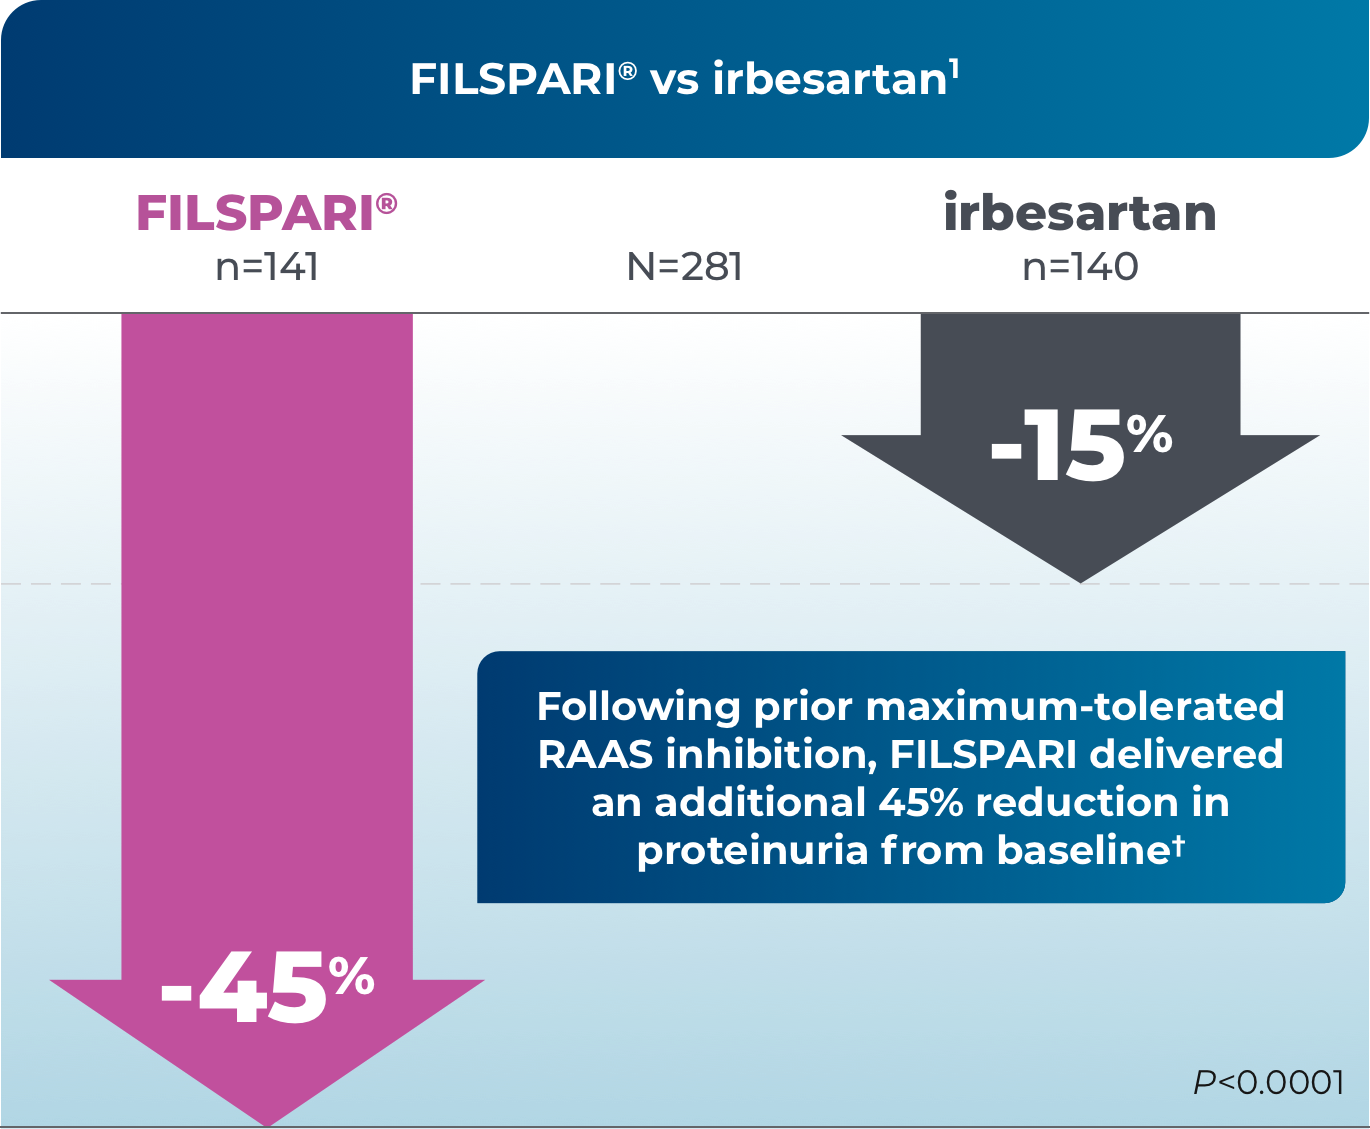 Bar graph showing 45% reduction in proteinuria with FILSPARI versus 15% reduction with irbesartan from baseline at Week 36